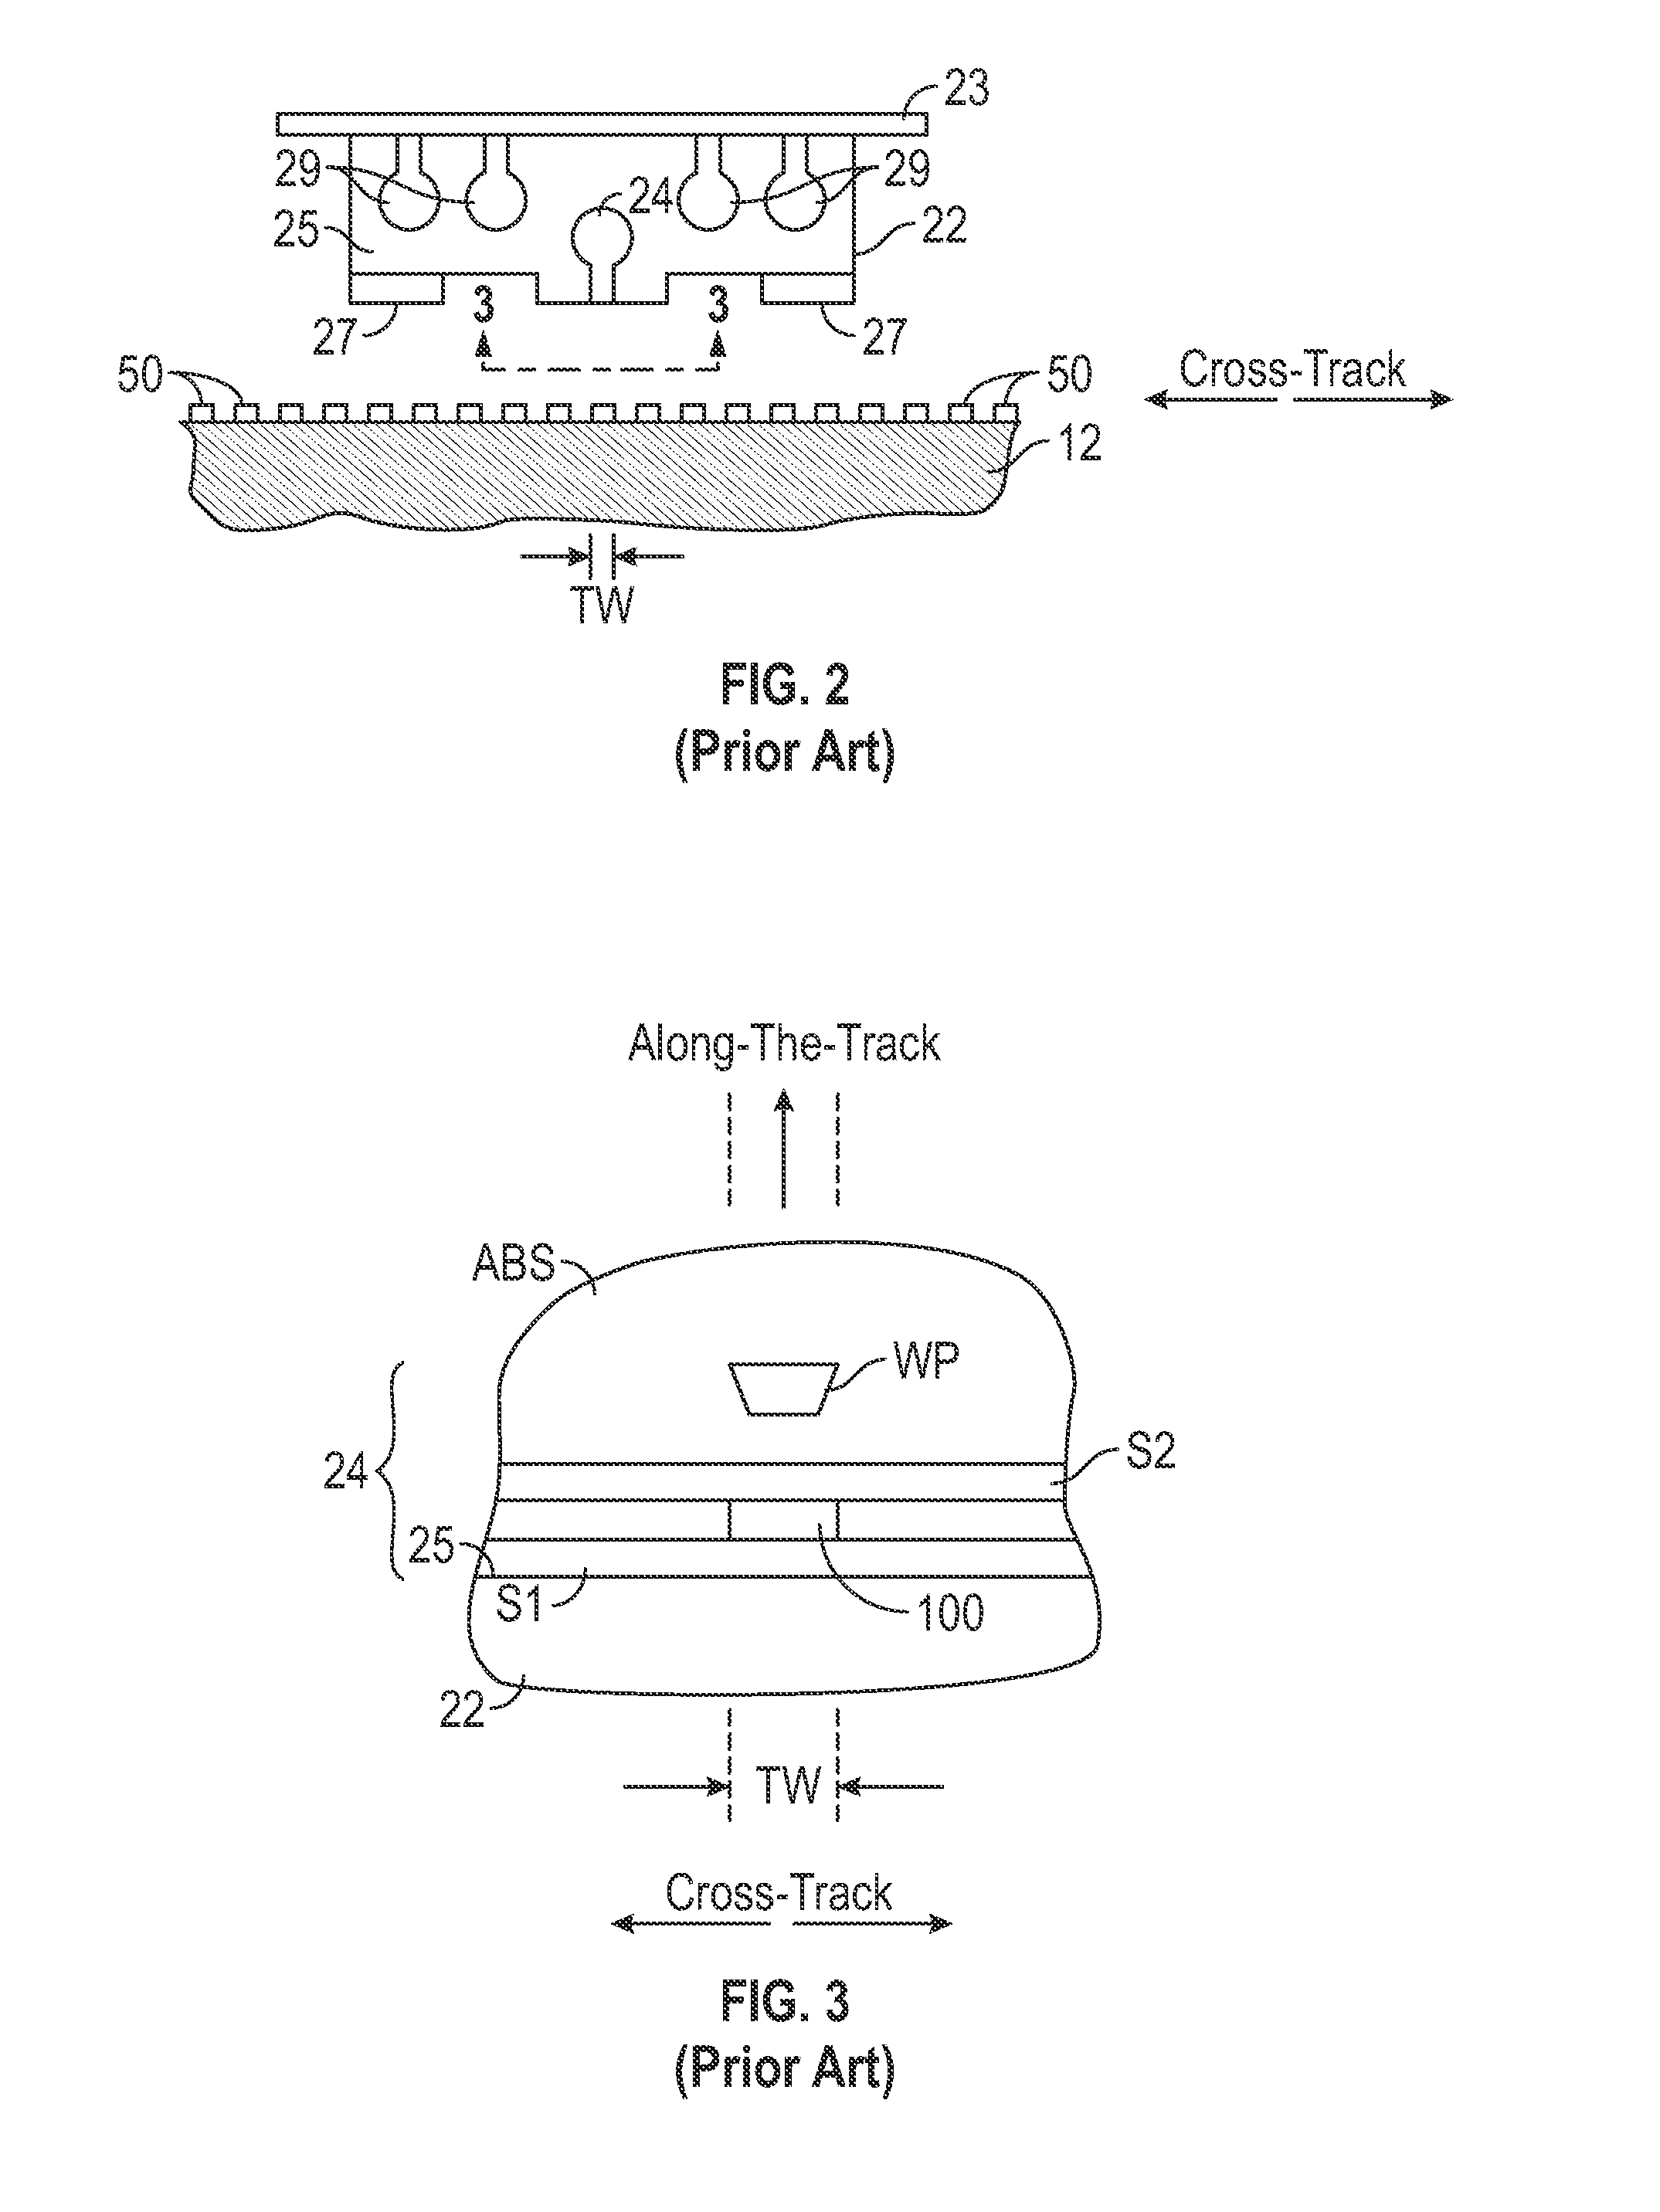 Current-perpendicular-to-the-plane (CPP) magnetoresistive (MR) sensor having an antiparallel free (APF) structure  with improved magnetic stability